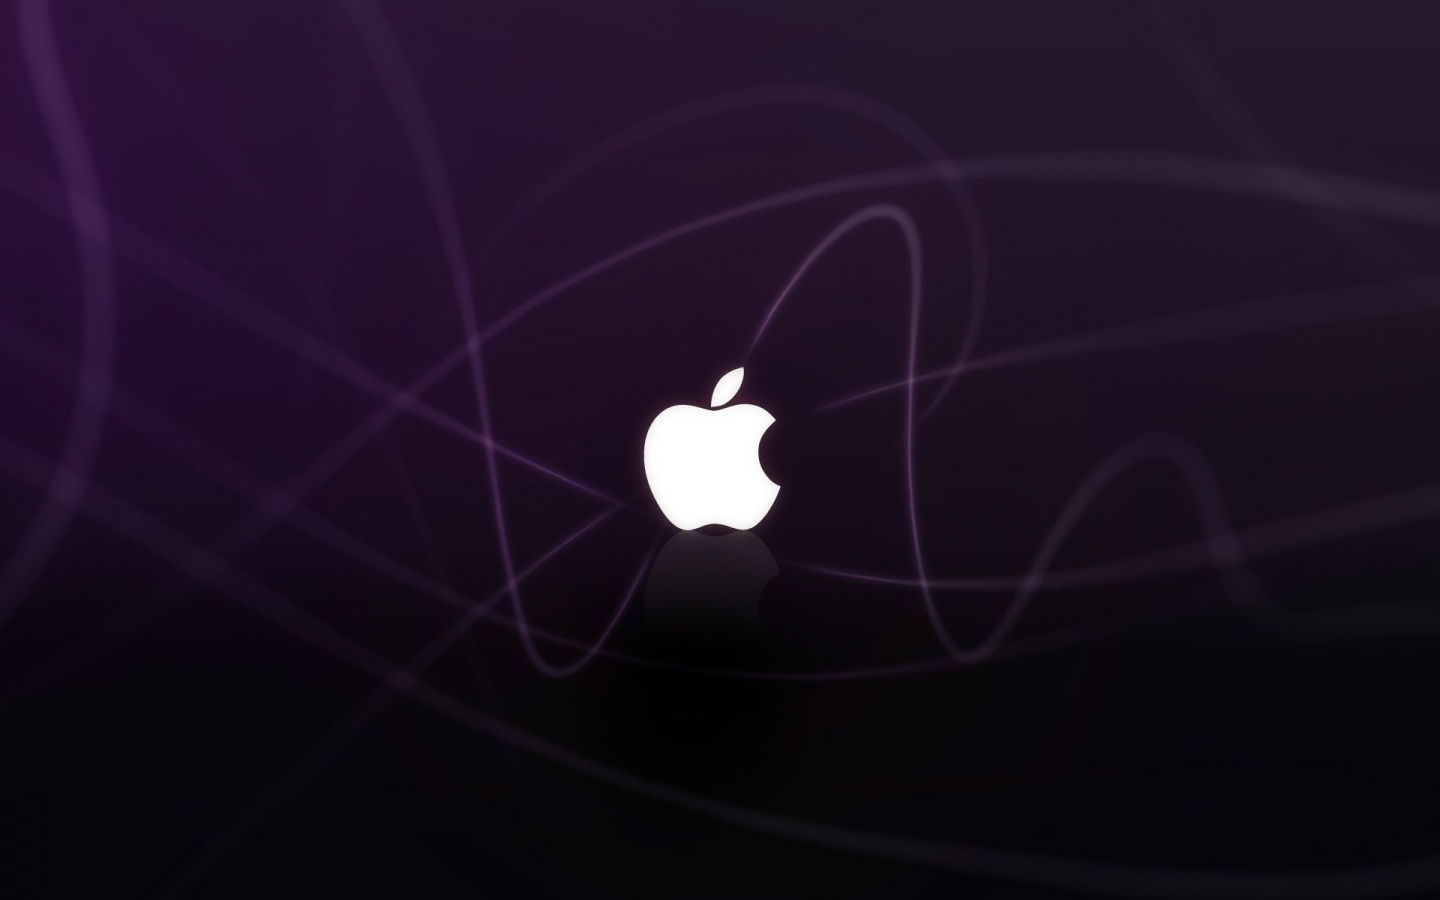 Purple Apple frequency for 1440 x 900 widescreen resolution